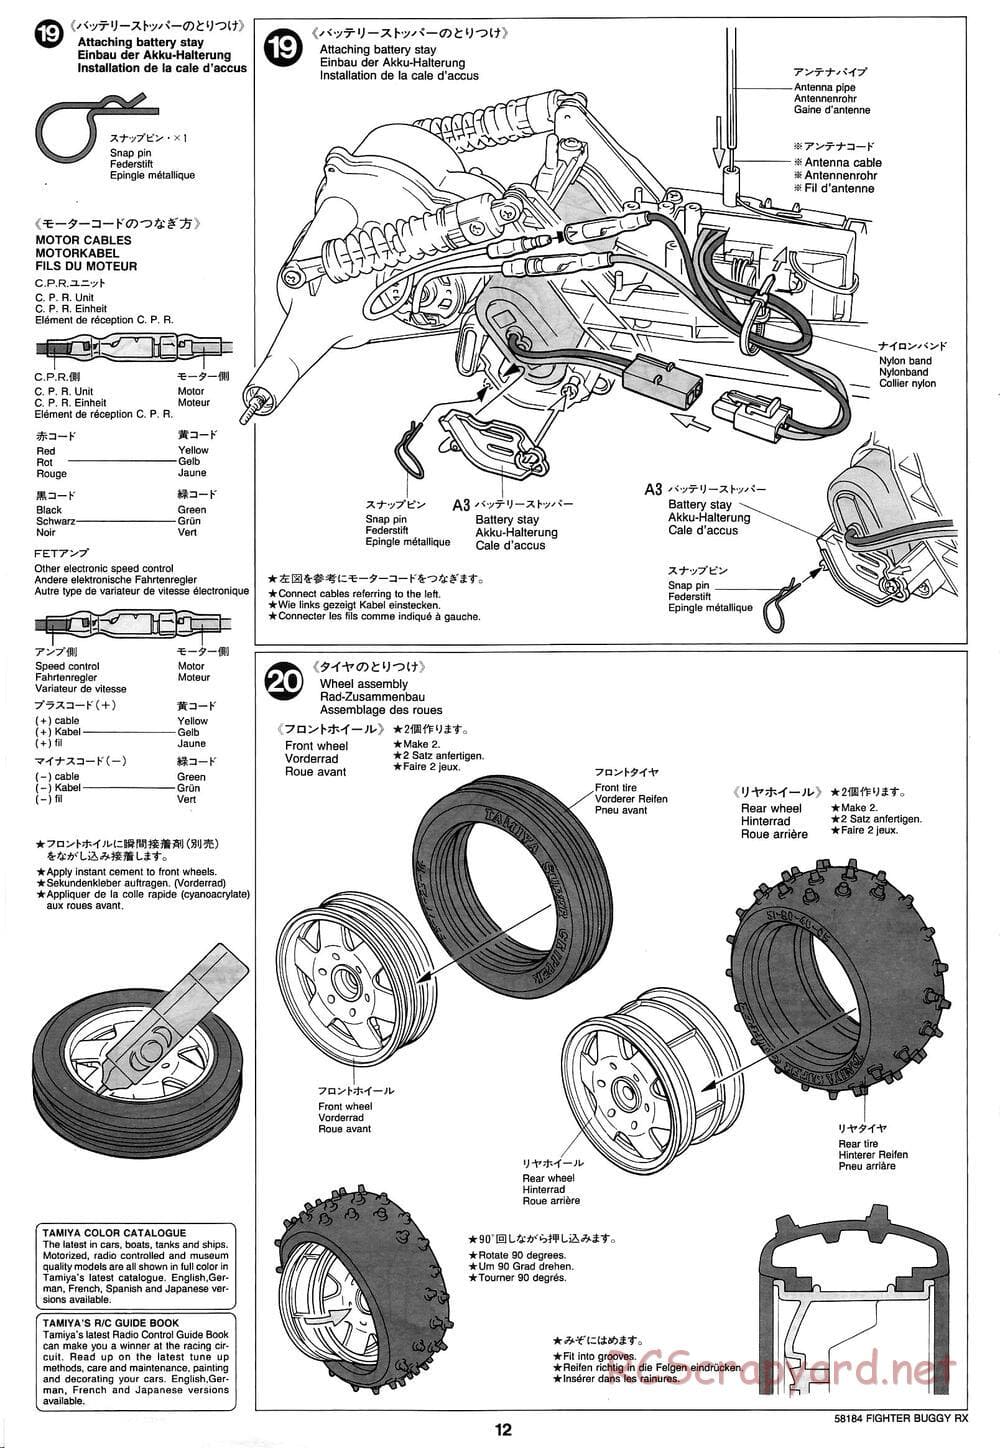 Tamiya - Fighter Buggy RX Chassis - Manual - Page 12